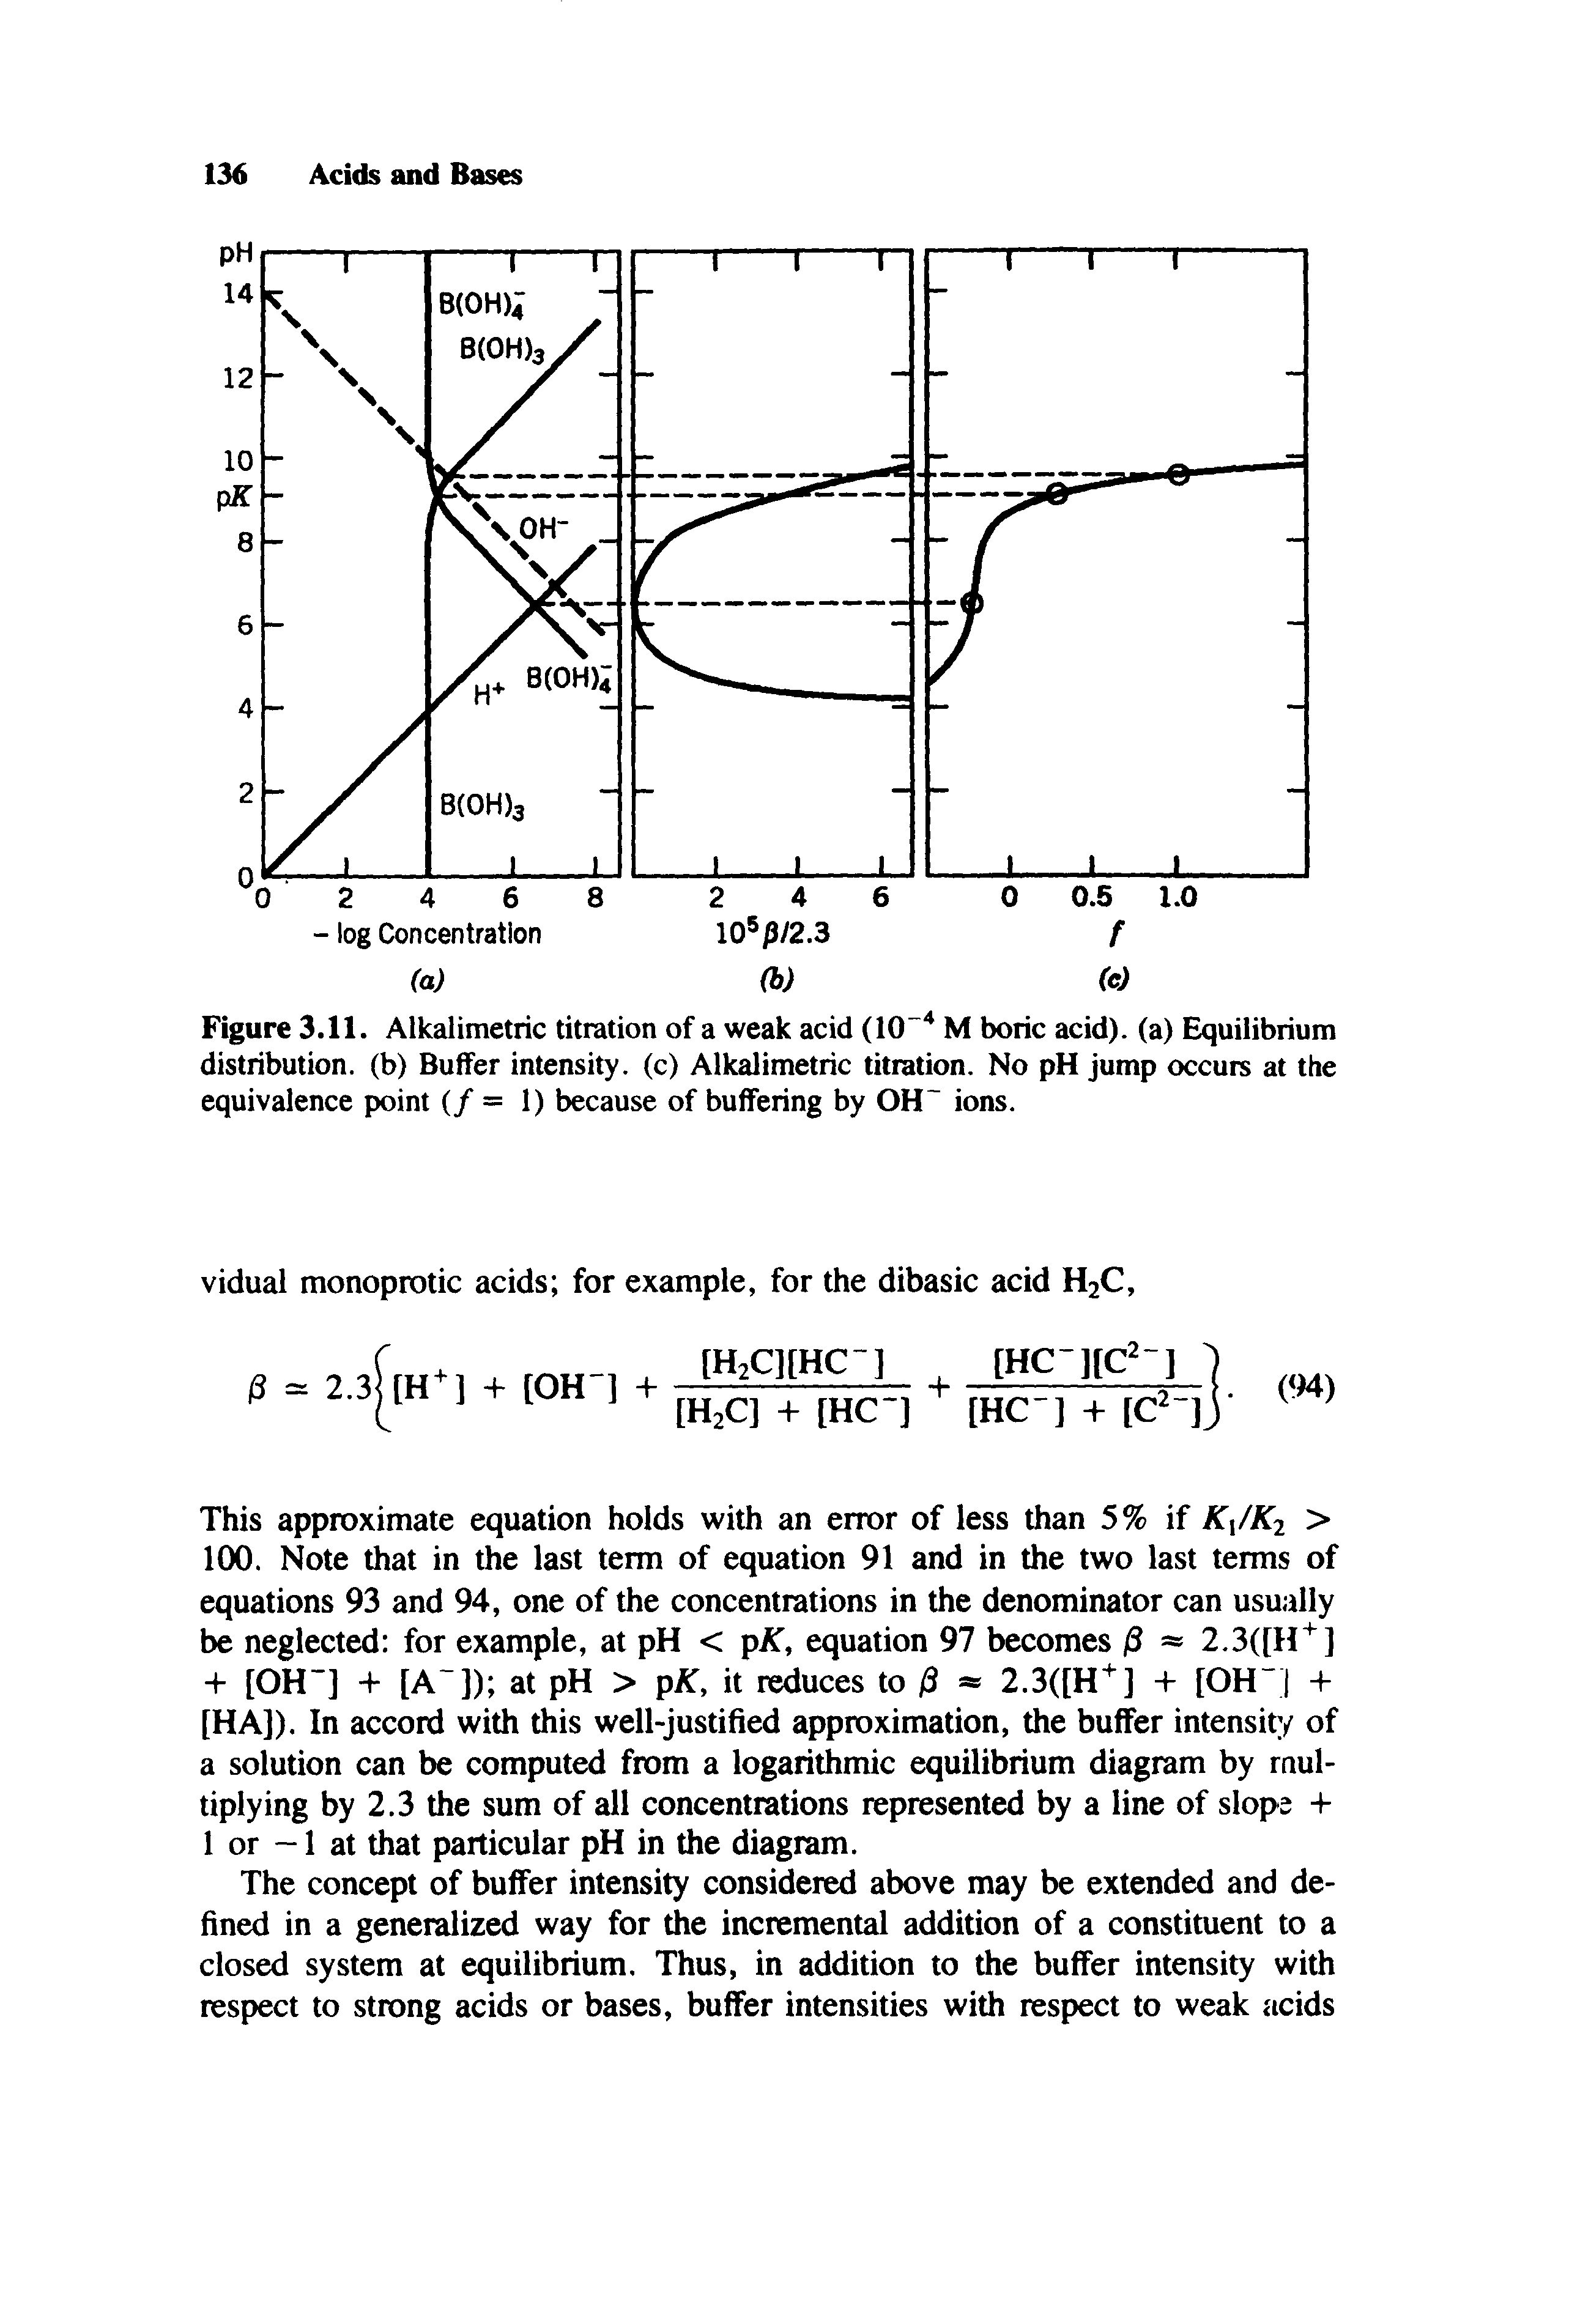 Figure 3.11. Alkalimetric titration of a weak acid (10 M boric acid), (a) Equilibrium distribution, (b) Buffer intensity, (c) Alkalimetric titration. No pH jump occurs at the equivalence point (/ = 1) because of buffering by OH ions.